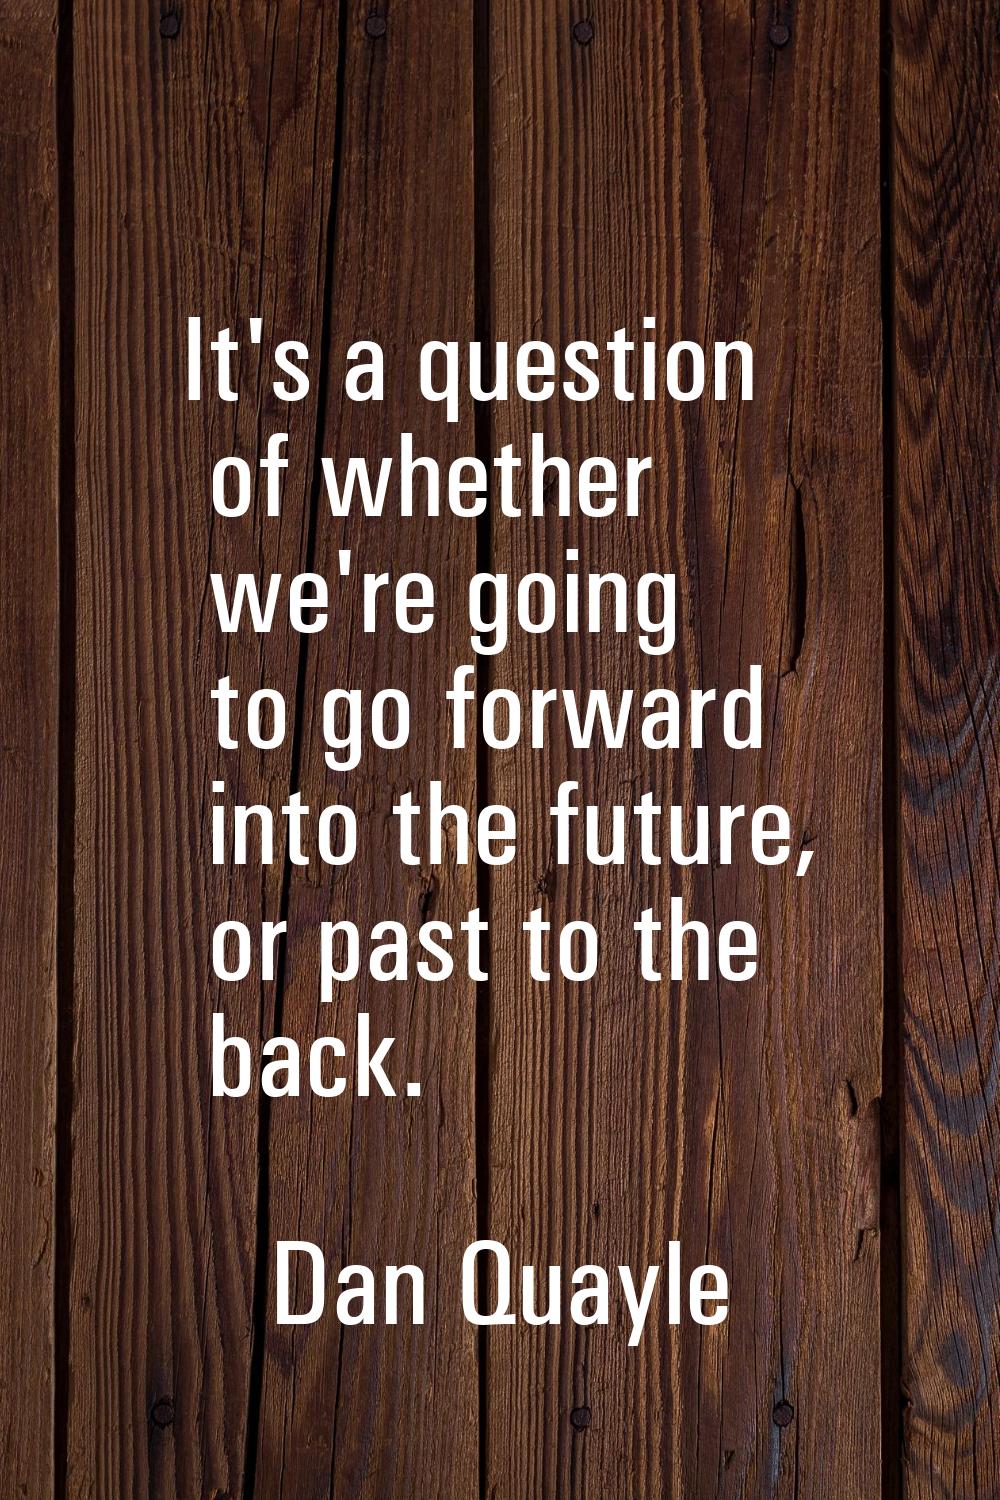 It's a question of whether we're going to go forward into the future, or past to the back.